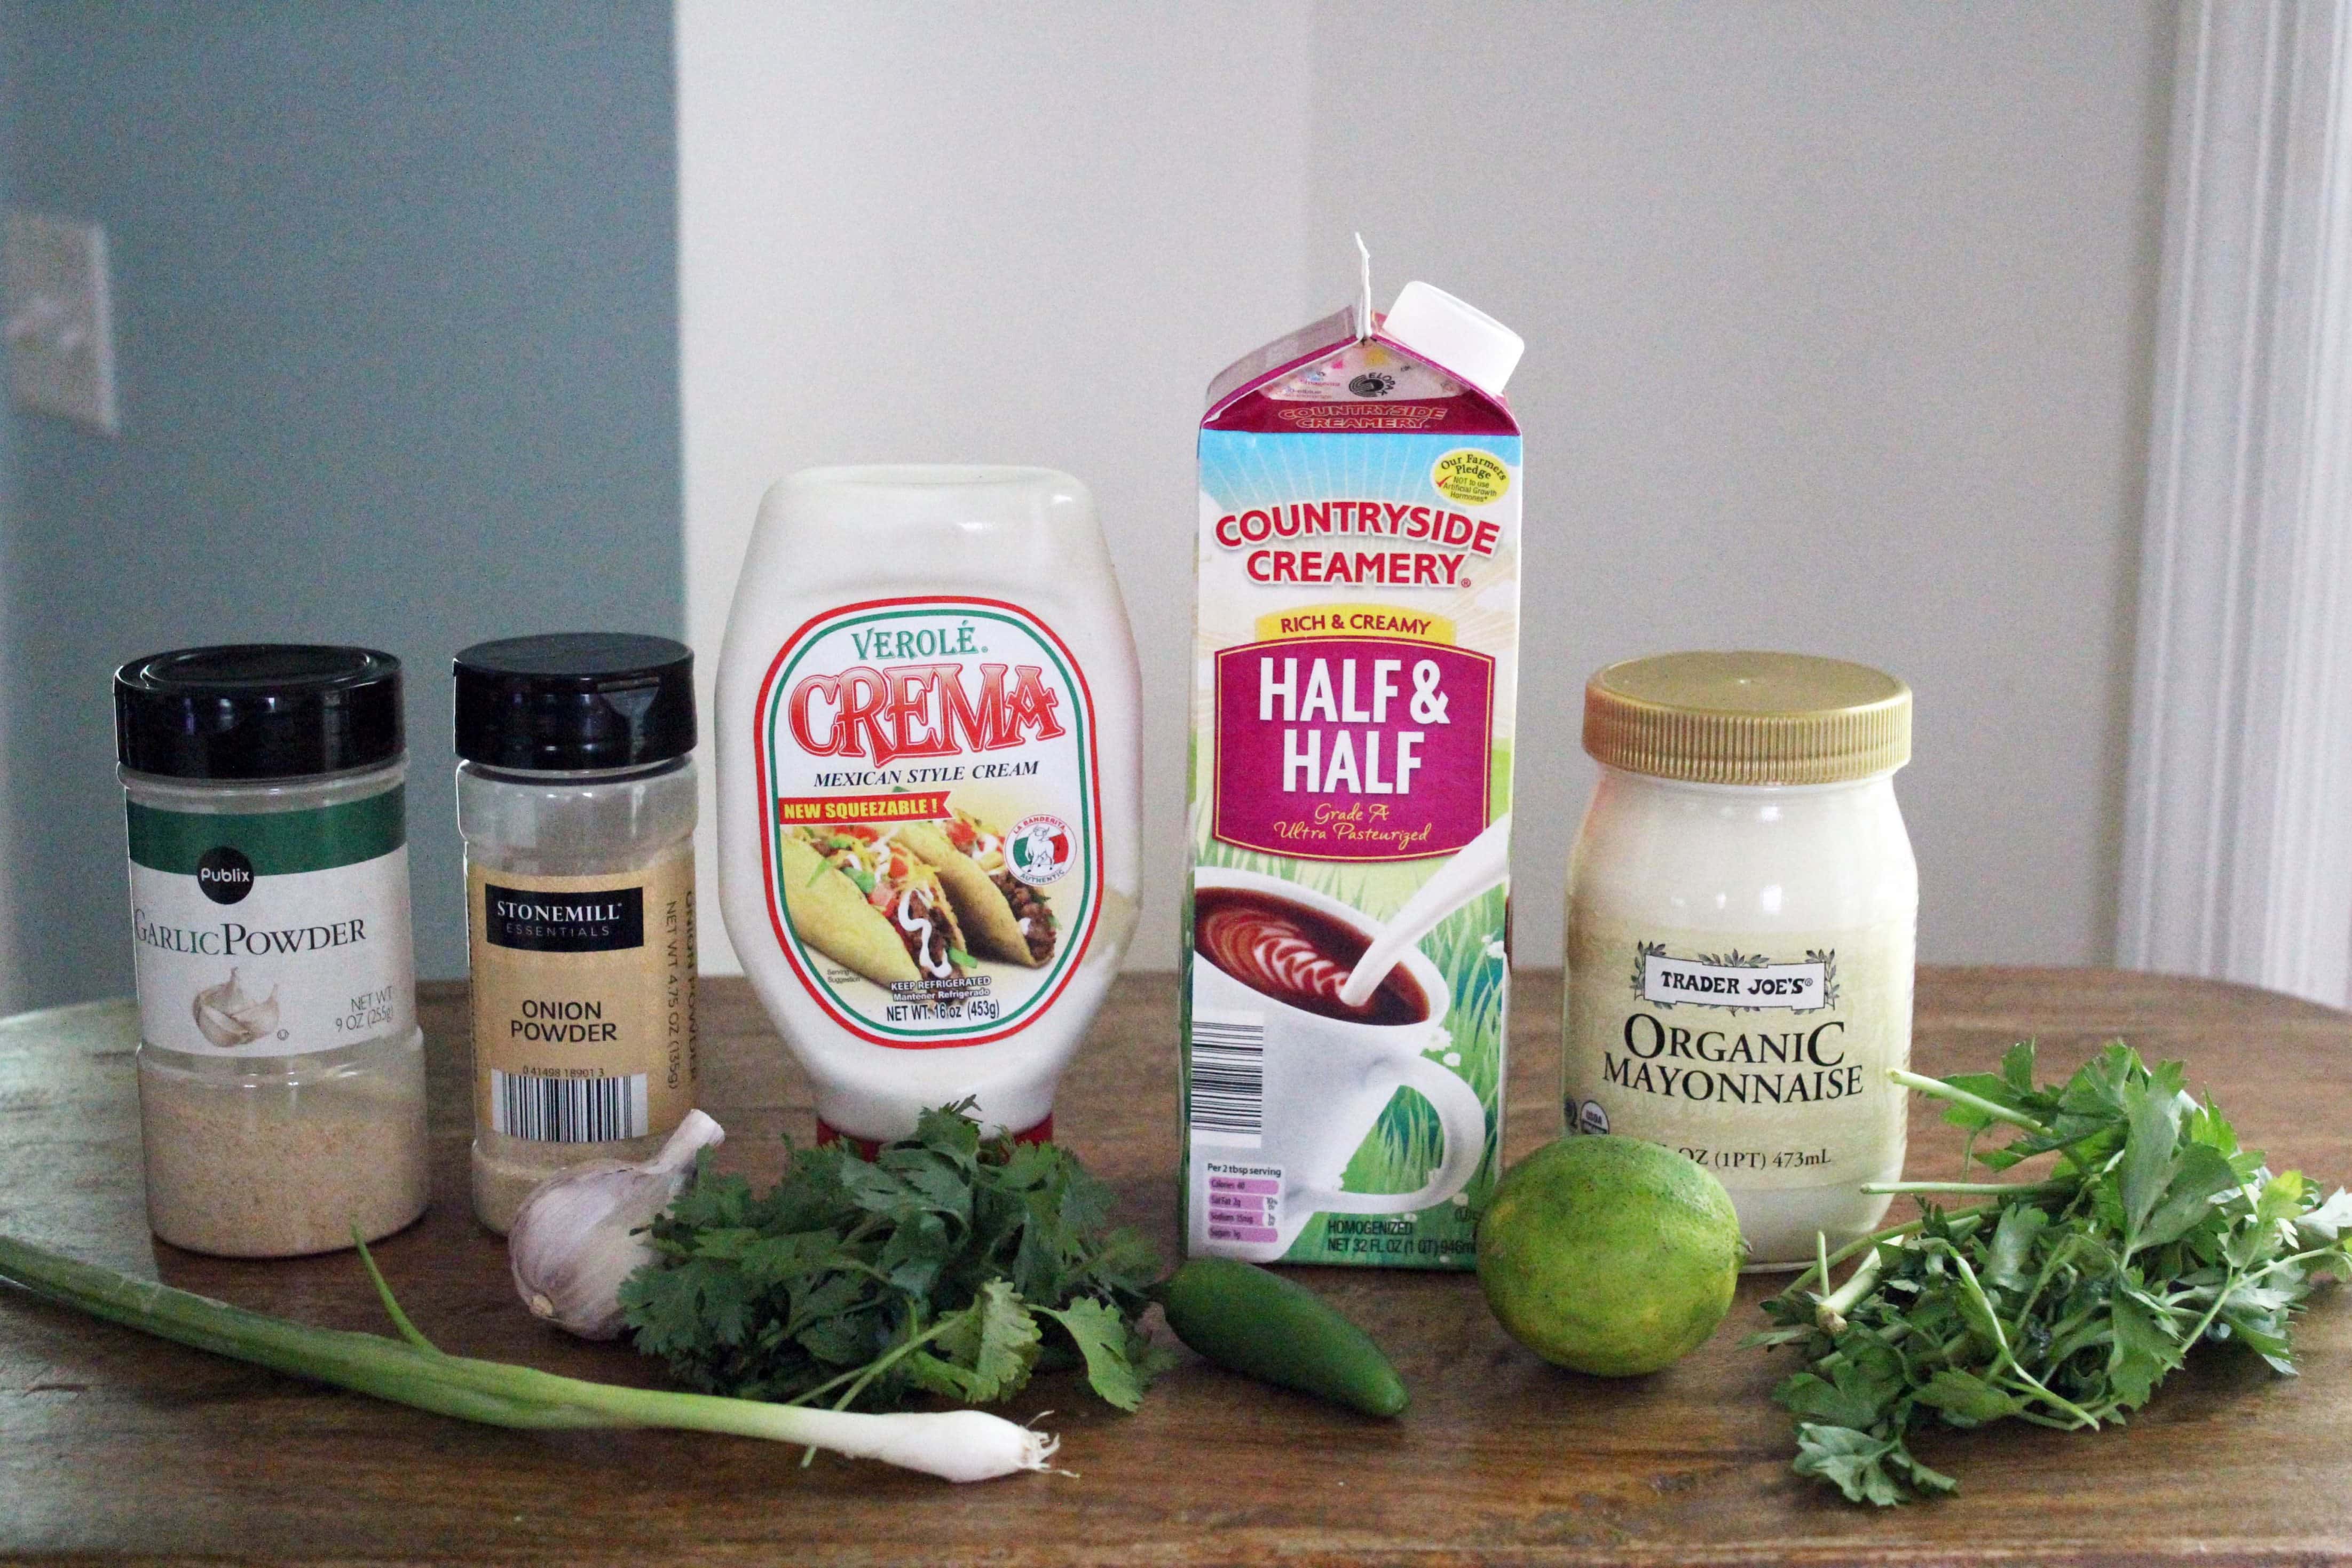 ingredients for creamy jalapeno ranch like Chuy's restaurant. 